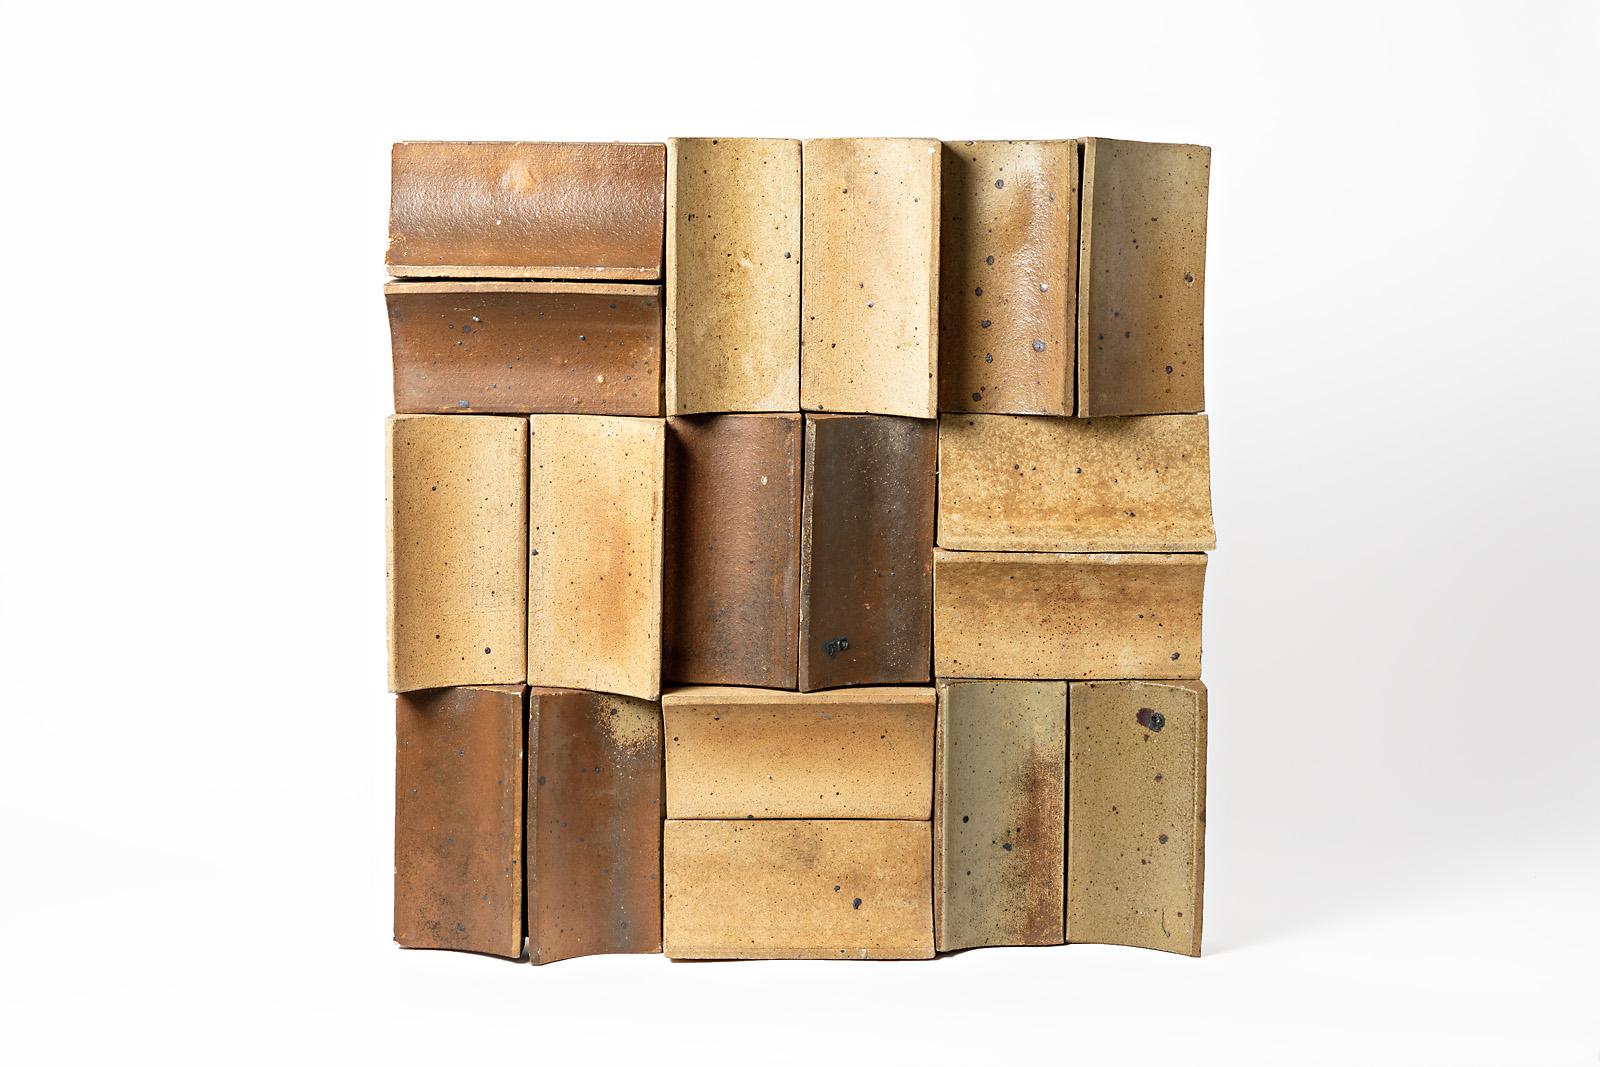 Pierre Digan

Exceptional pair of ceramic wall panels by the French artist Pierre Digan.

Realised circa 1975 in La Borne.

Elegant brown stoneware ceramic colors in original good condition

Abstract ceramic wall decoration on a wood panel